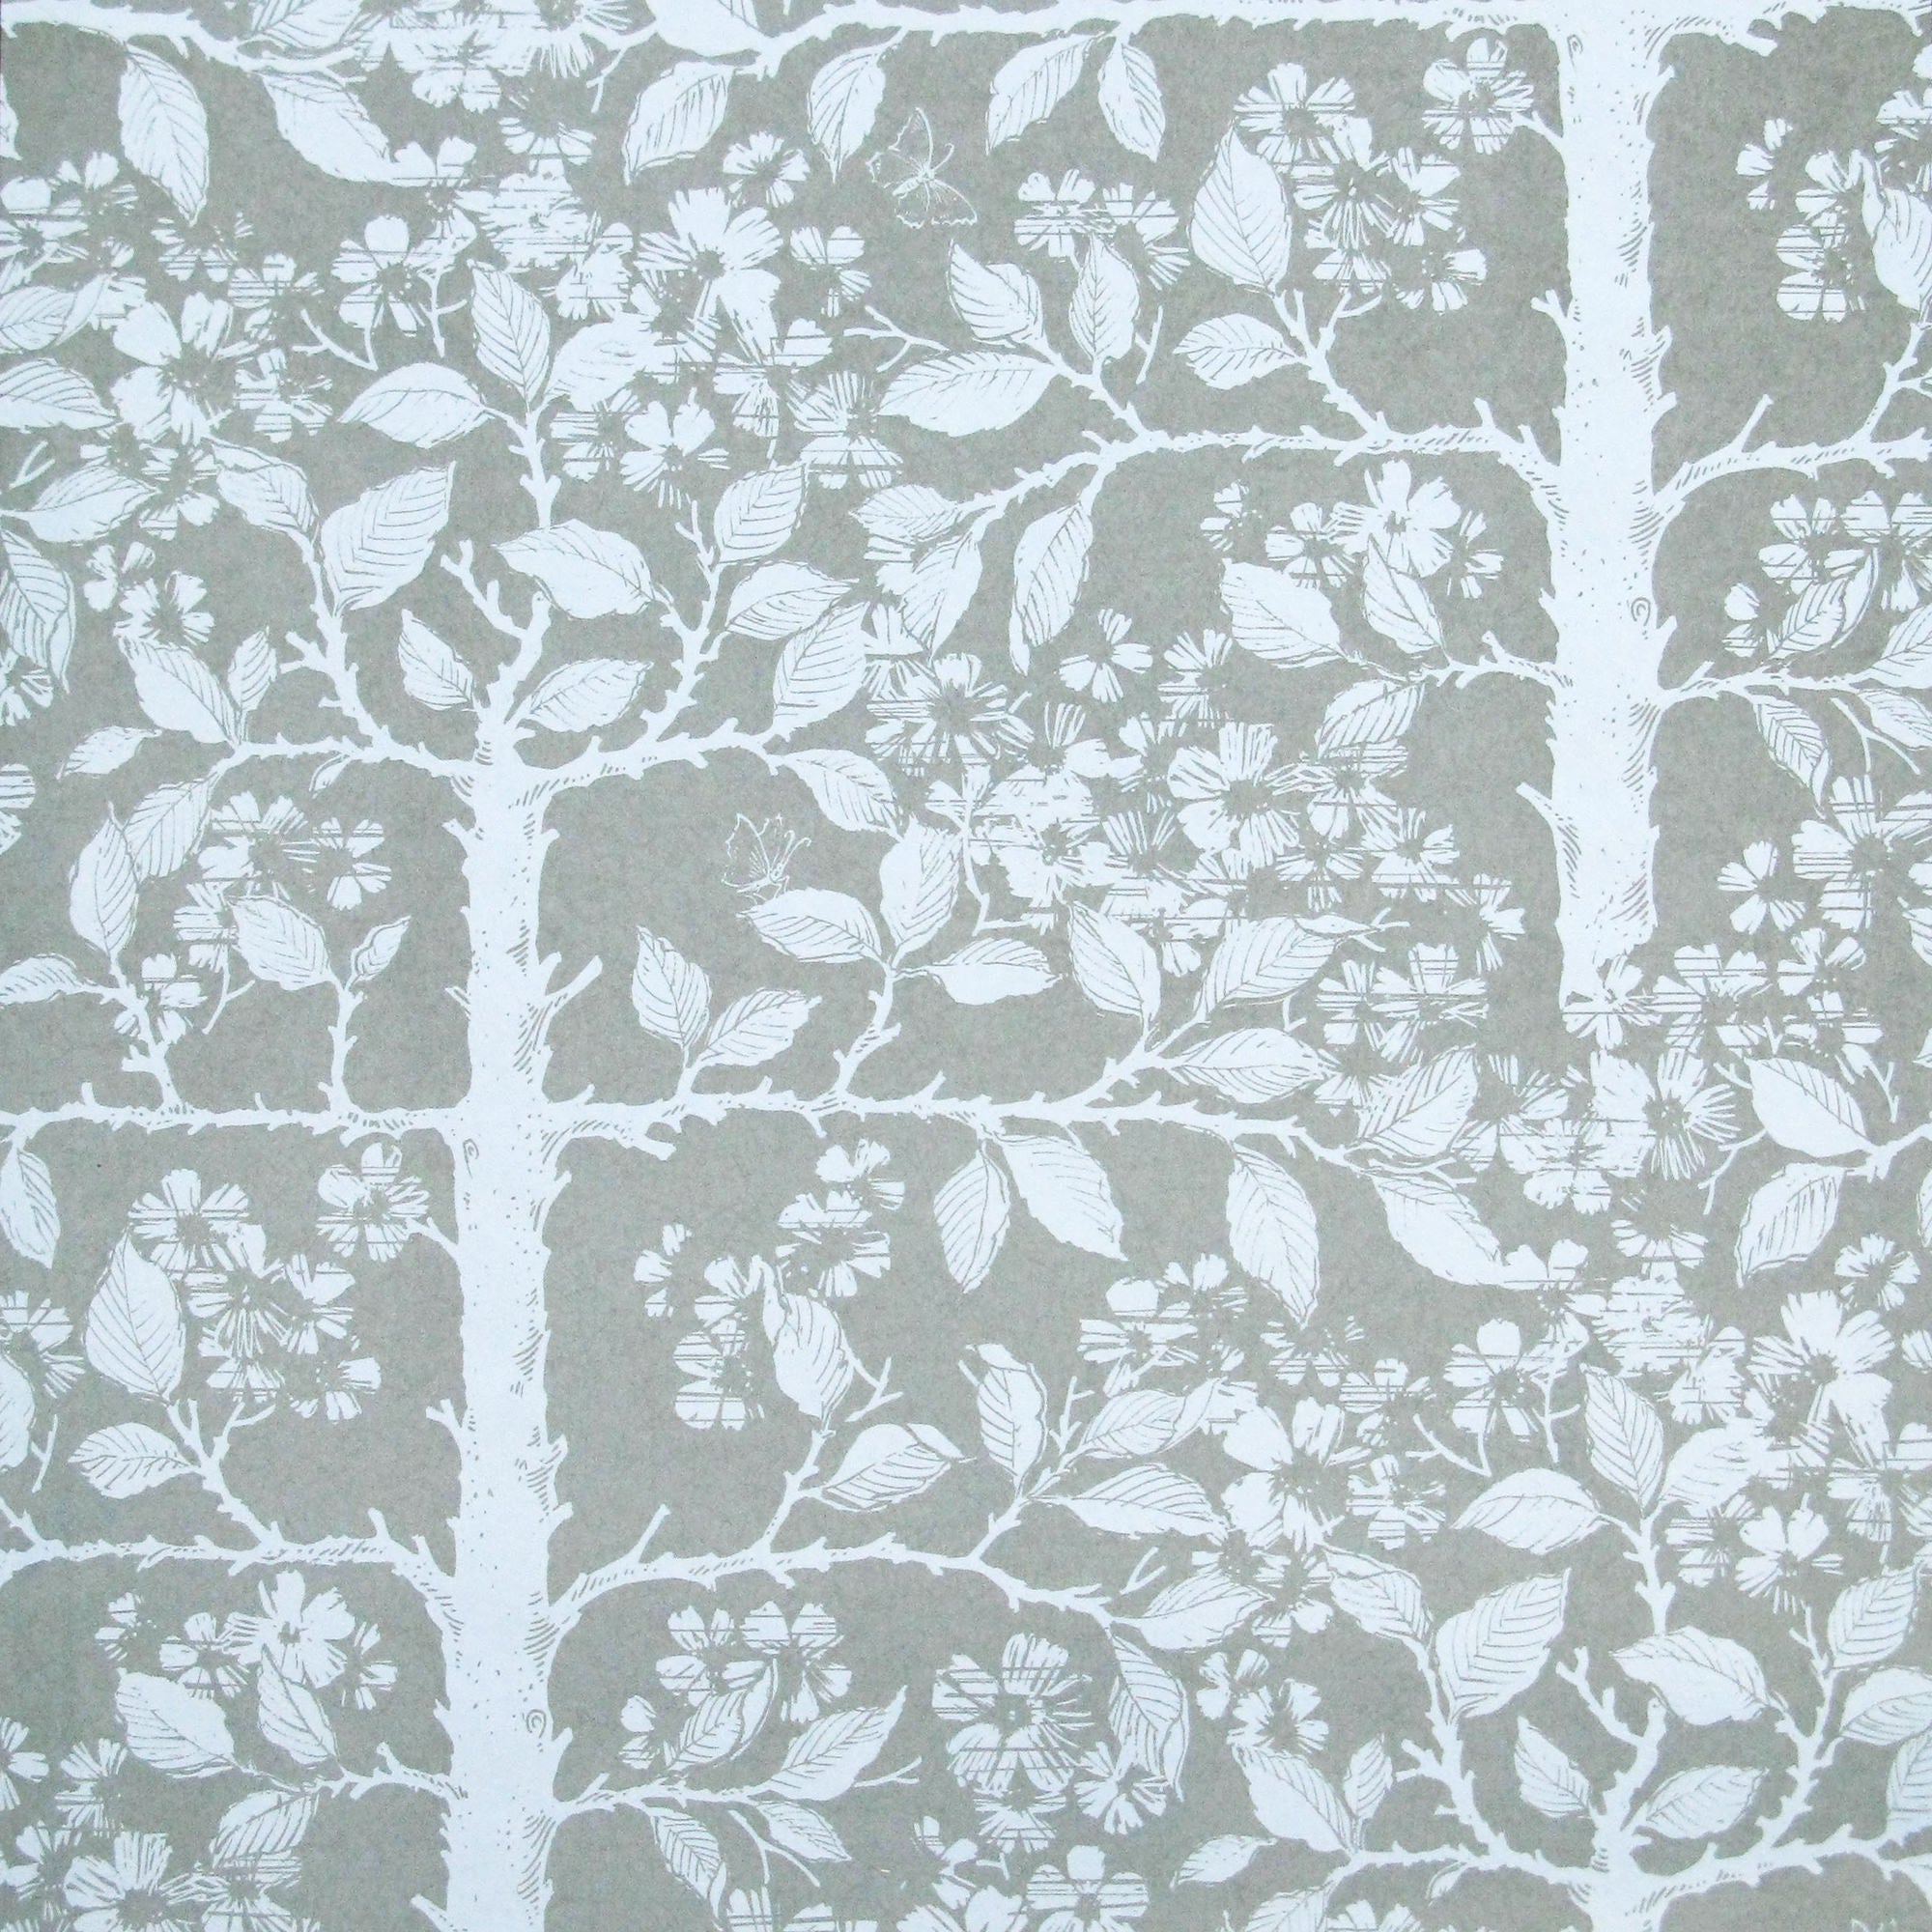 Detail of wallpaper in a large-scale tree and leaf print in white on a light gray field.